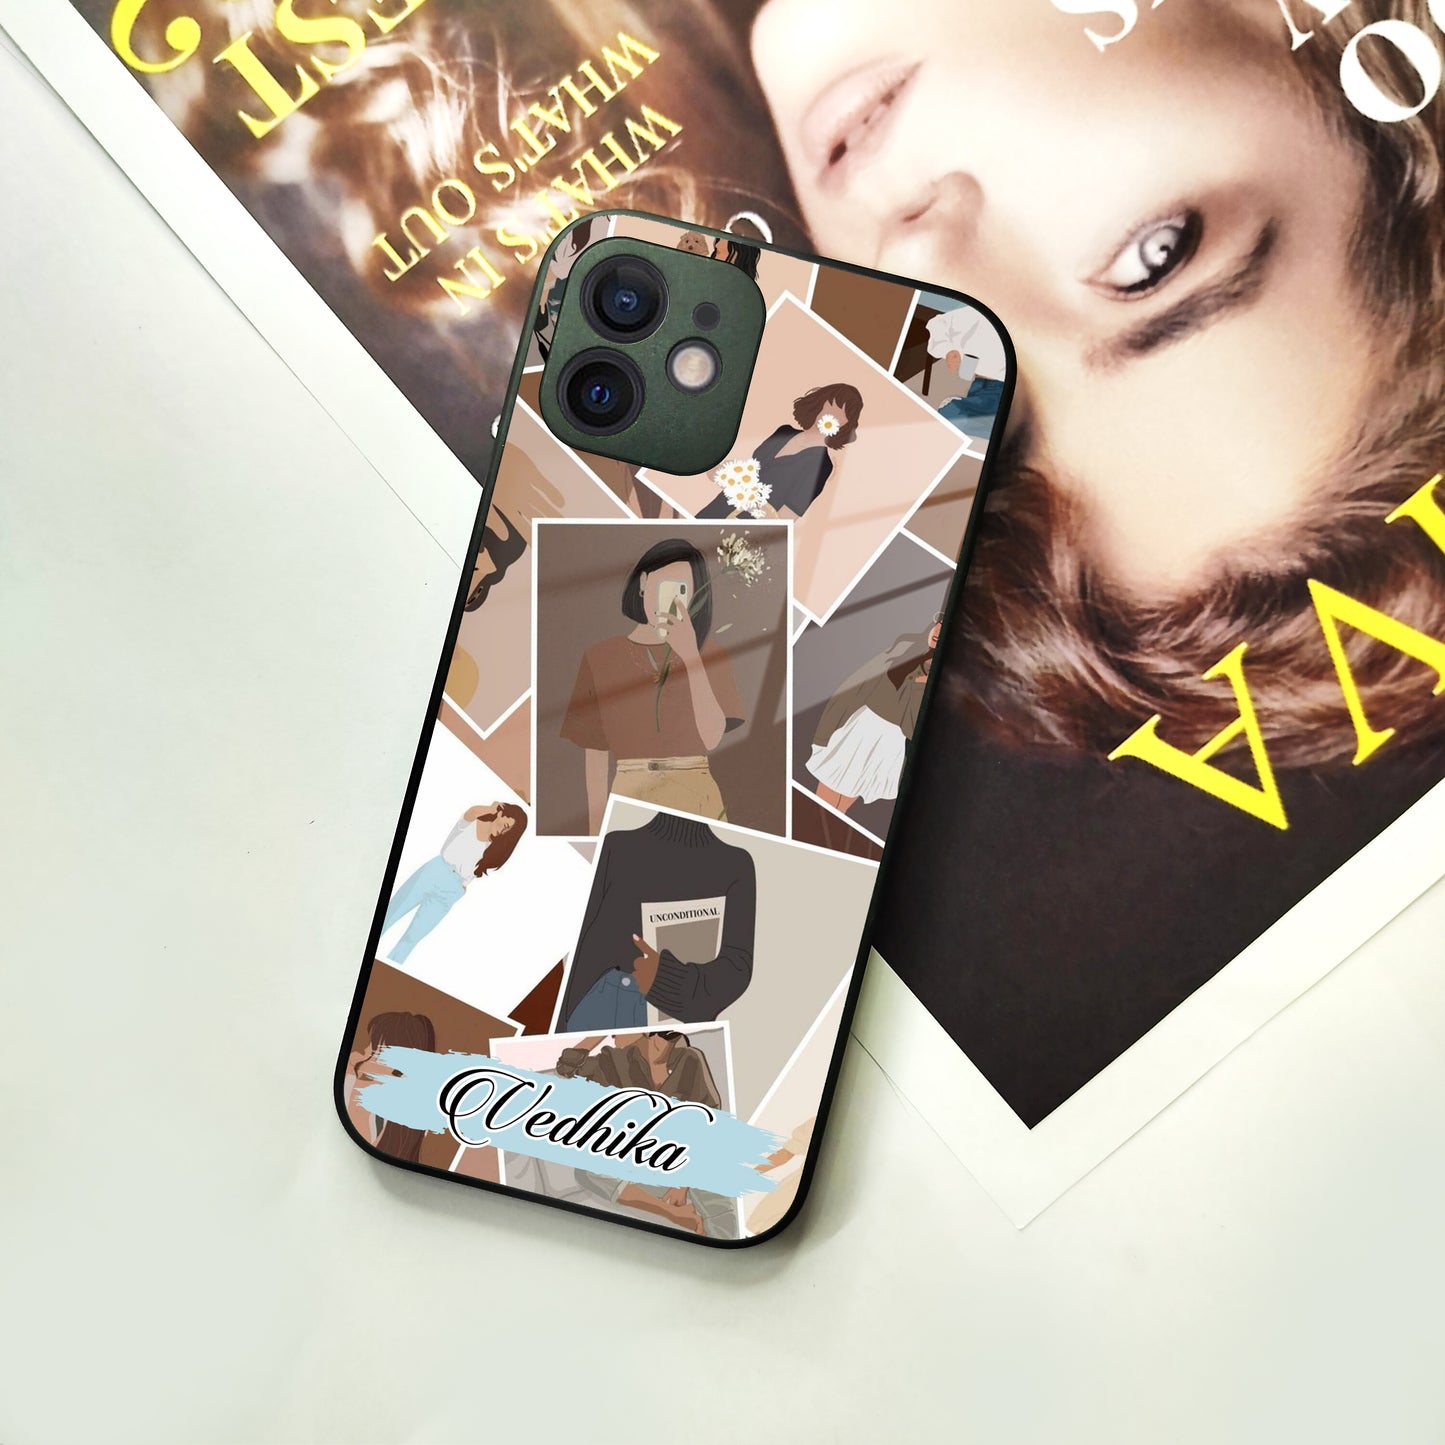 Selfie  Girl Collage Glass Case Cover For iPhone